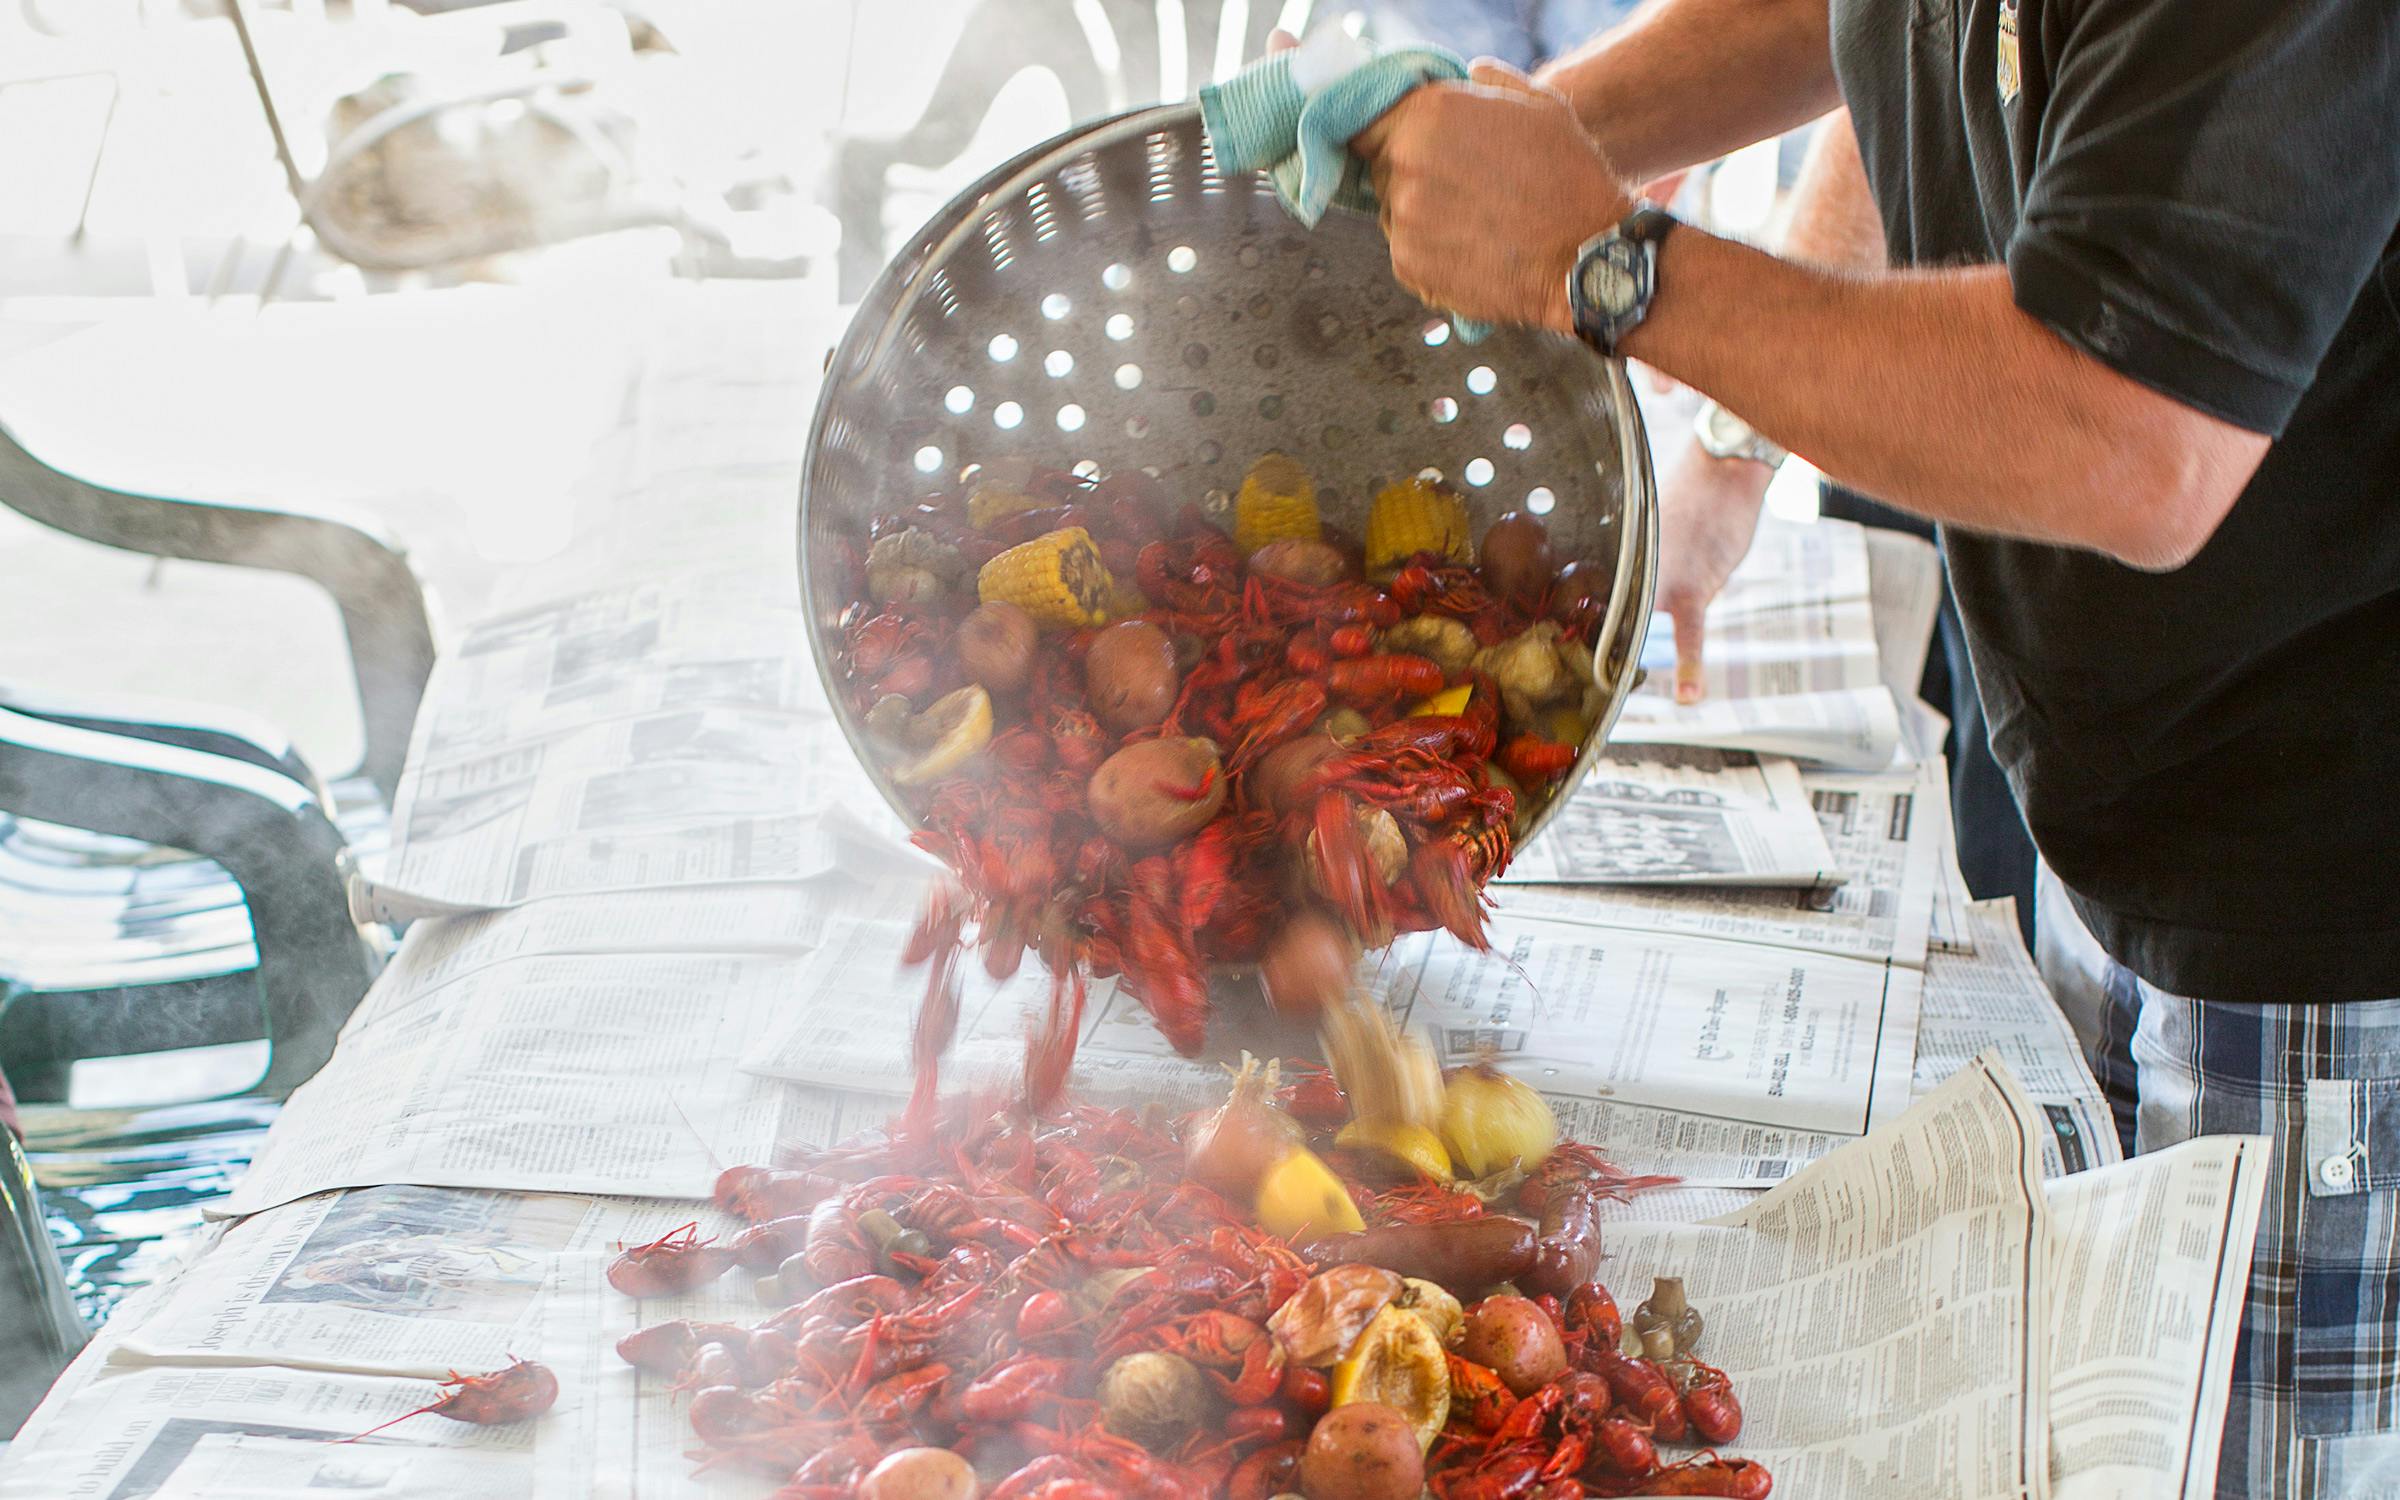 https://img.texasmonthly.com/2022/03/texas-crawfish-boil.jpg?auto=compress&crop=faces&fit=fit&fm=pjpg&ixlib=php-3.3.1&q=45